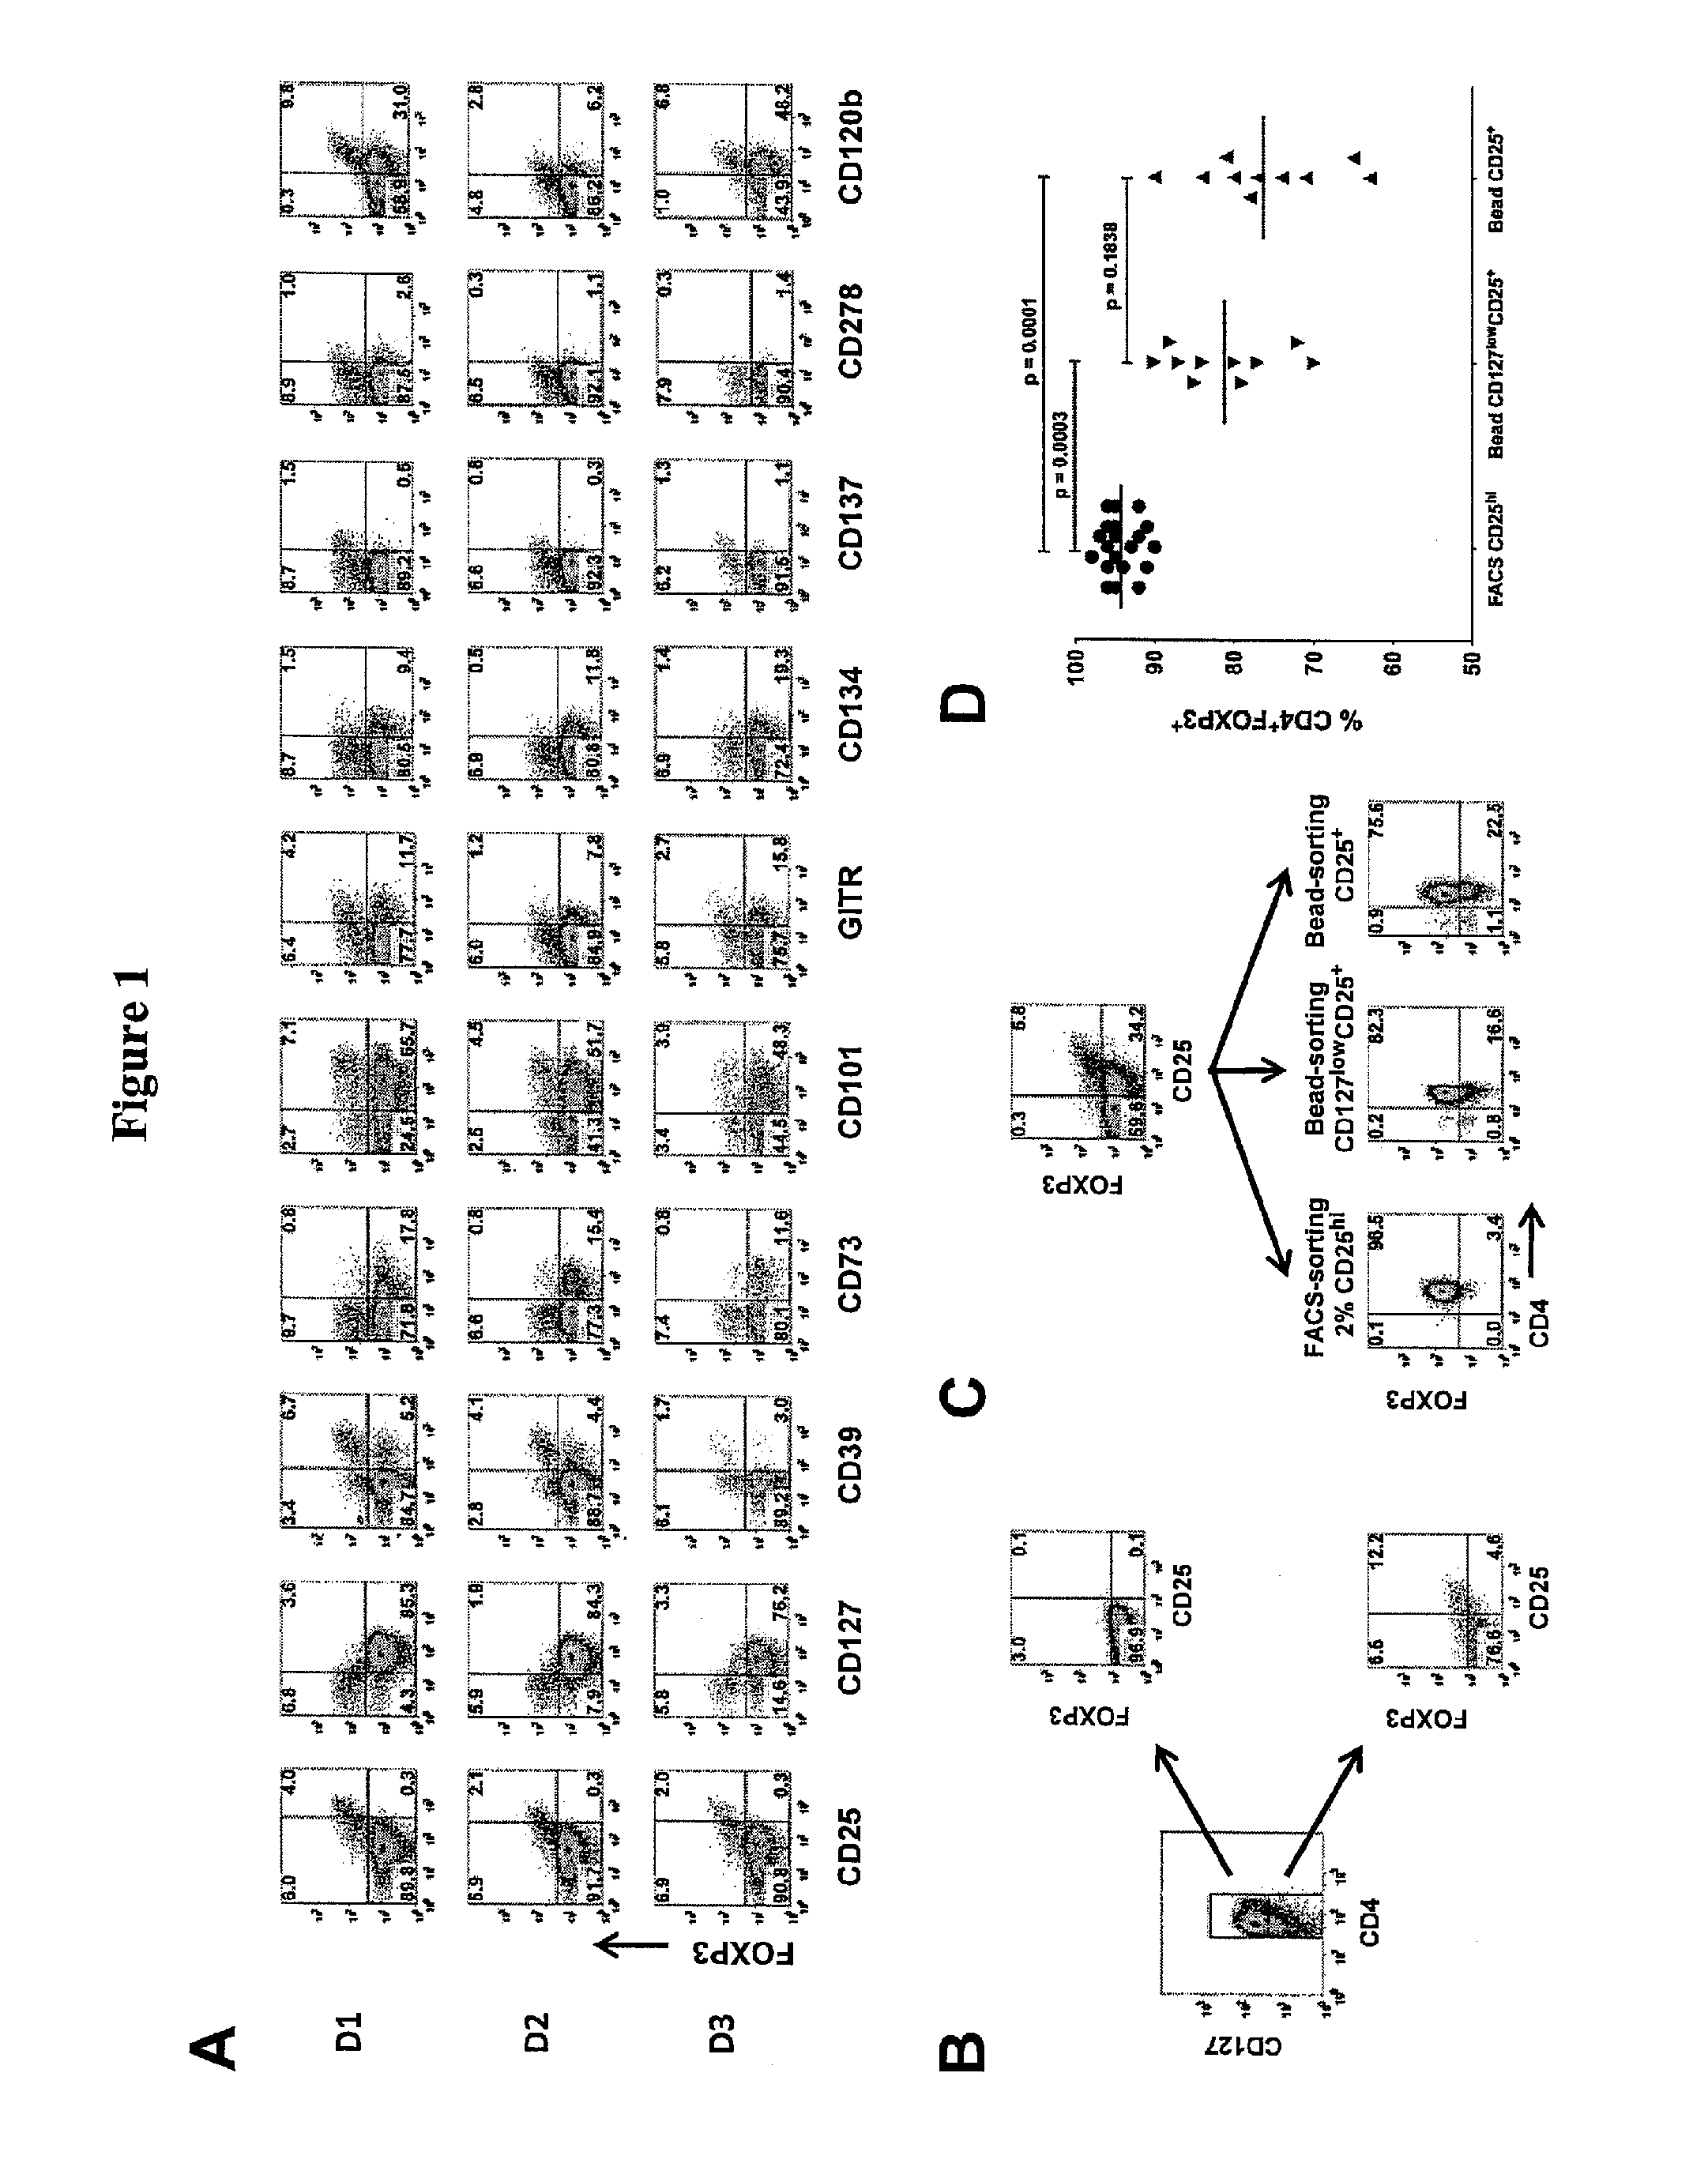 Method of making an isolated population of FOXP3+ regulatory T cells